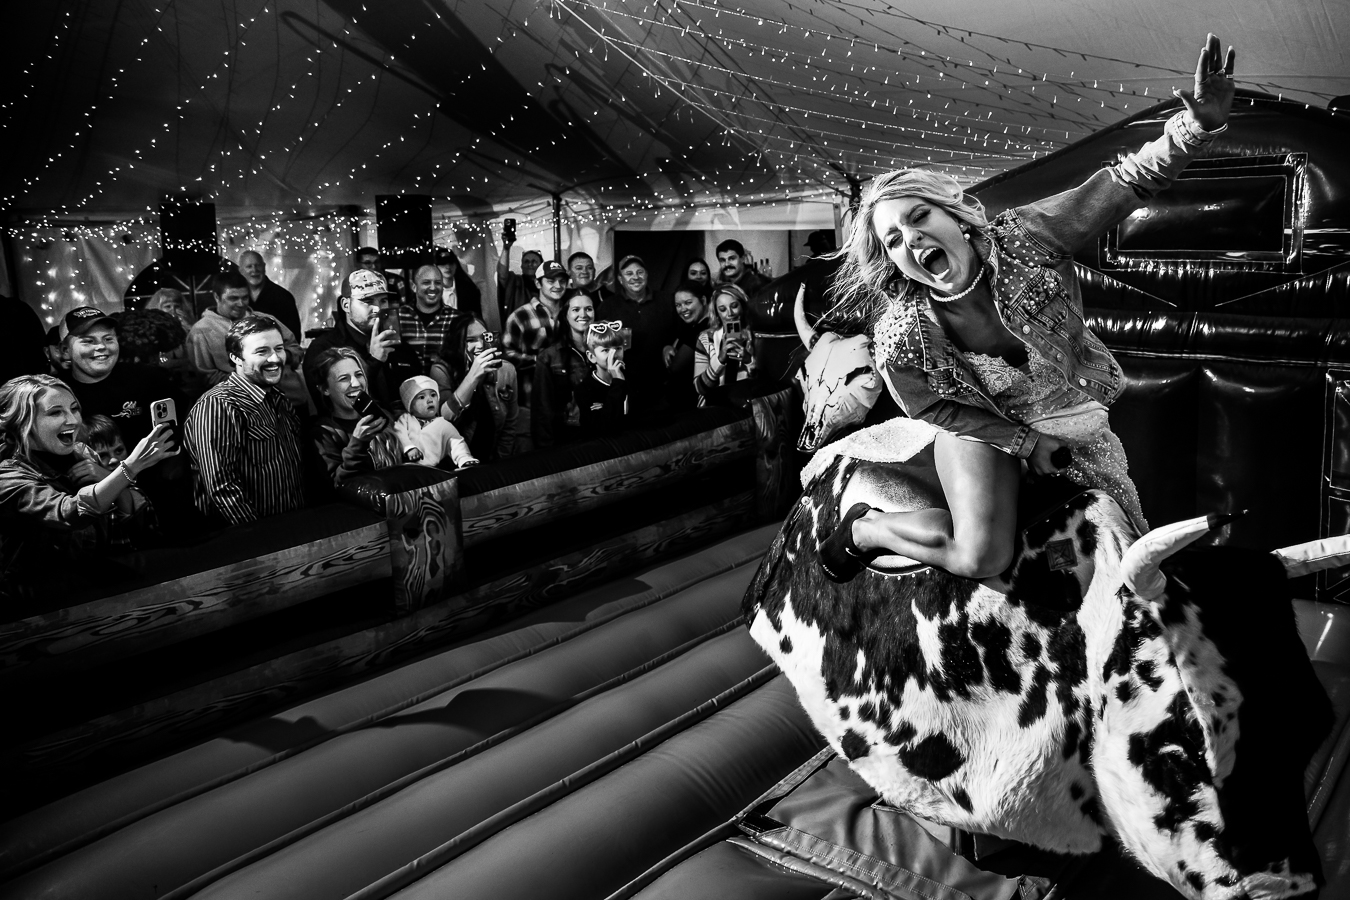 fun, candid black-and-white image of the bride as she rides the mechanical bull at her wild country wedding as her guests cheer for her during this fun, unique country wedding reception